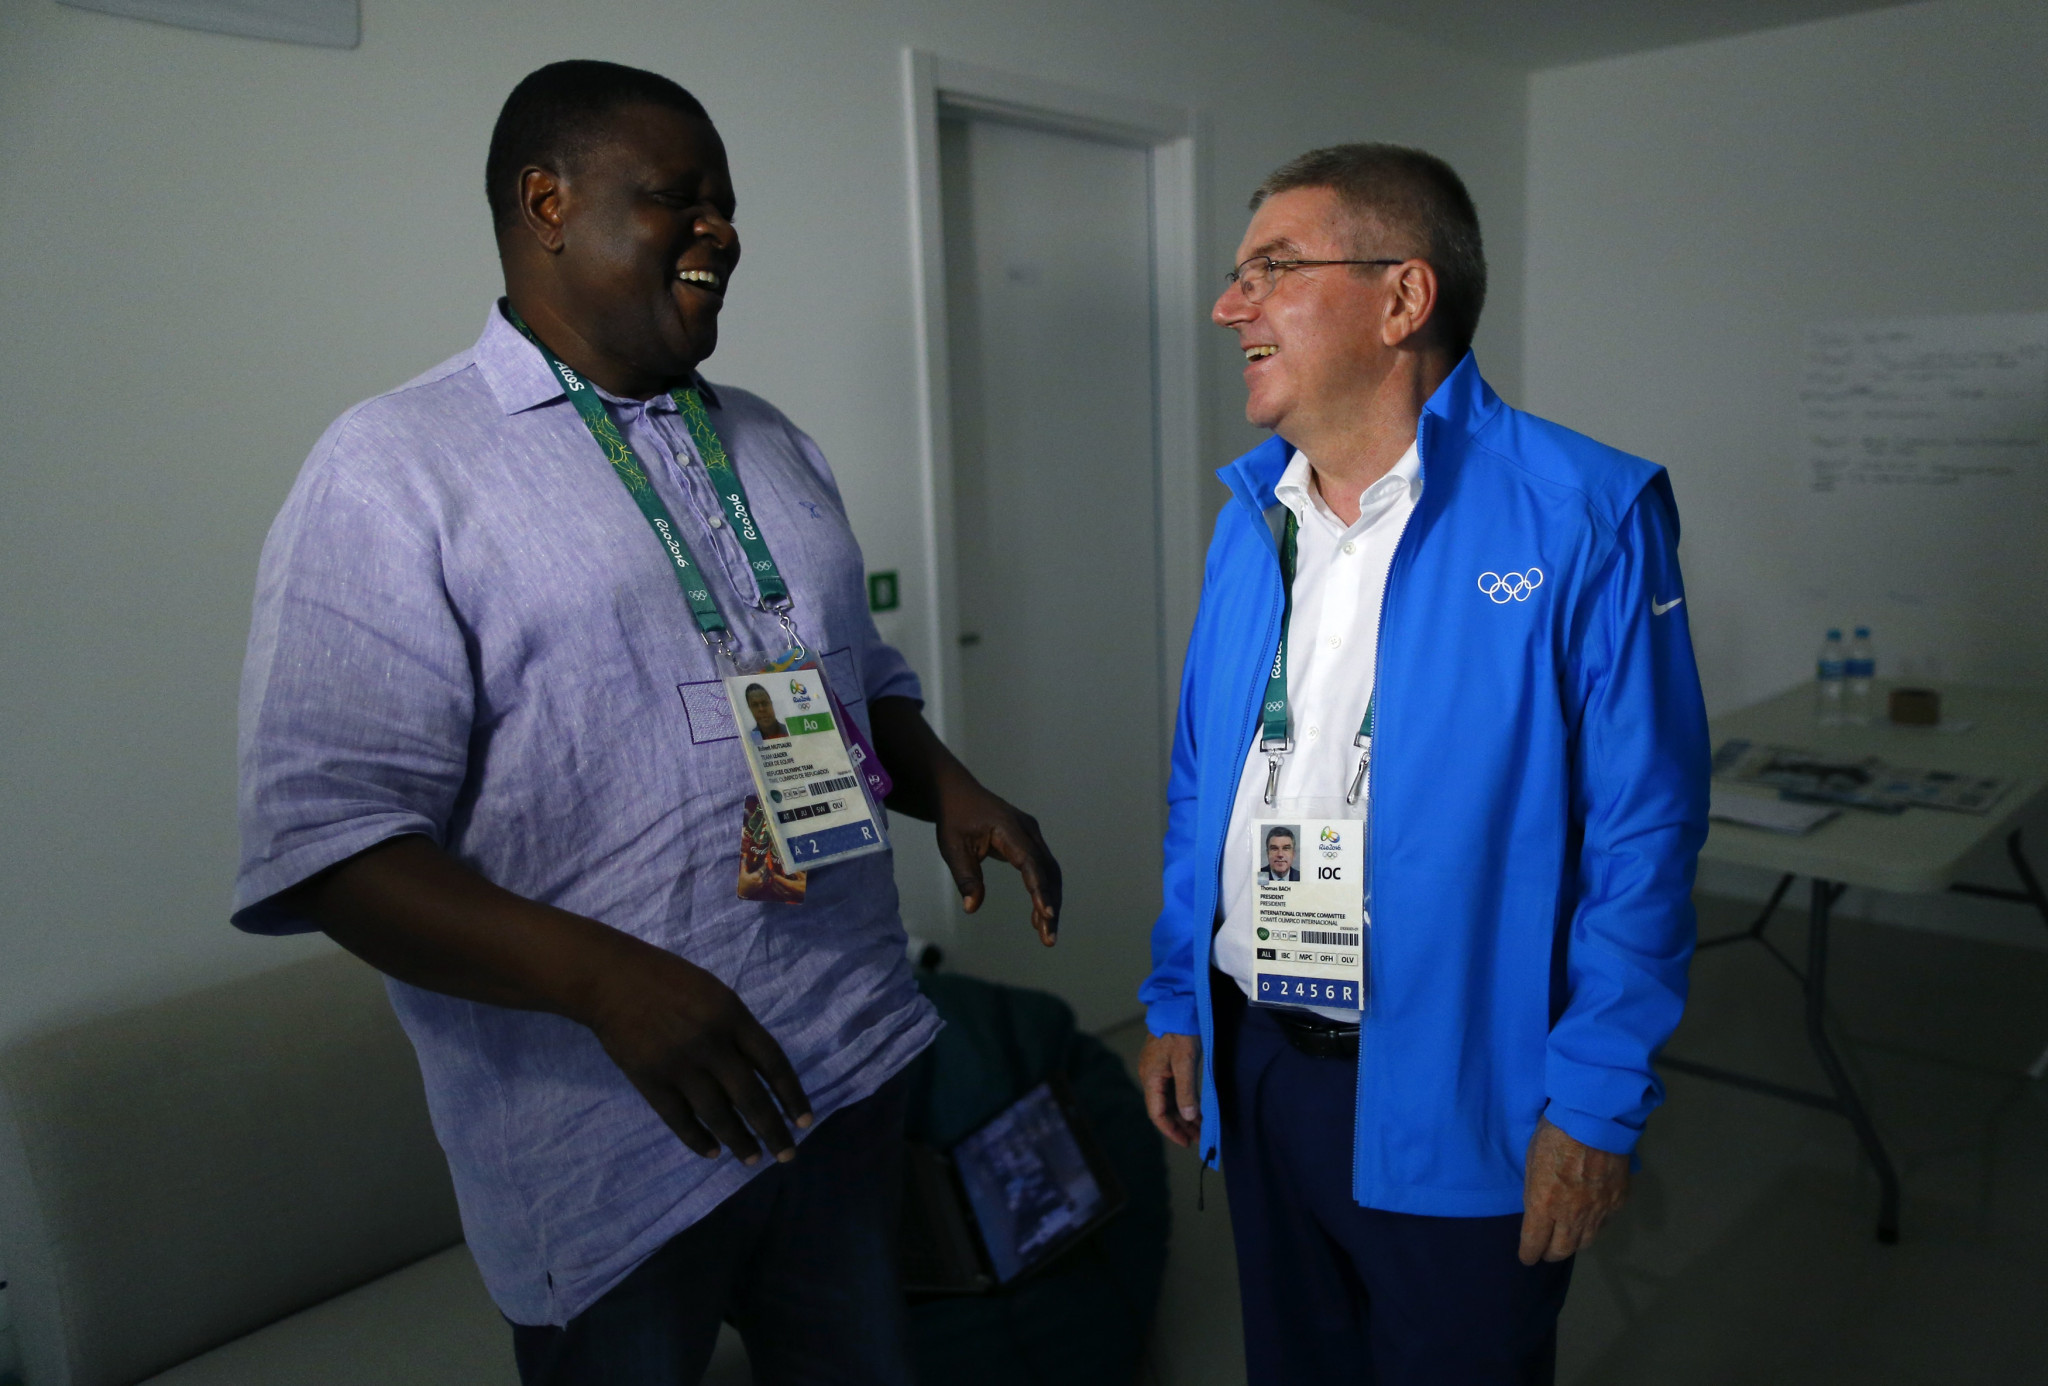 Robert Mutsauki, pictured here with International Olympic Committee President Thomas Bach, has been hired to draft the National Olympic Committee of Kenya's strategic plan for 2019 to 2024 ©Getty Images